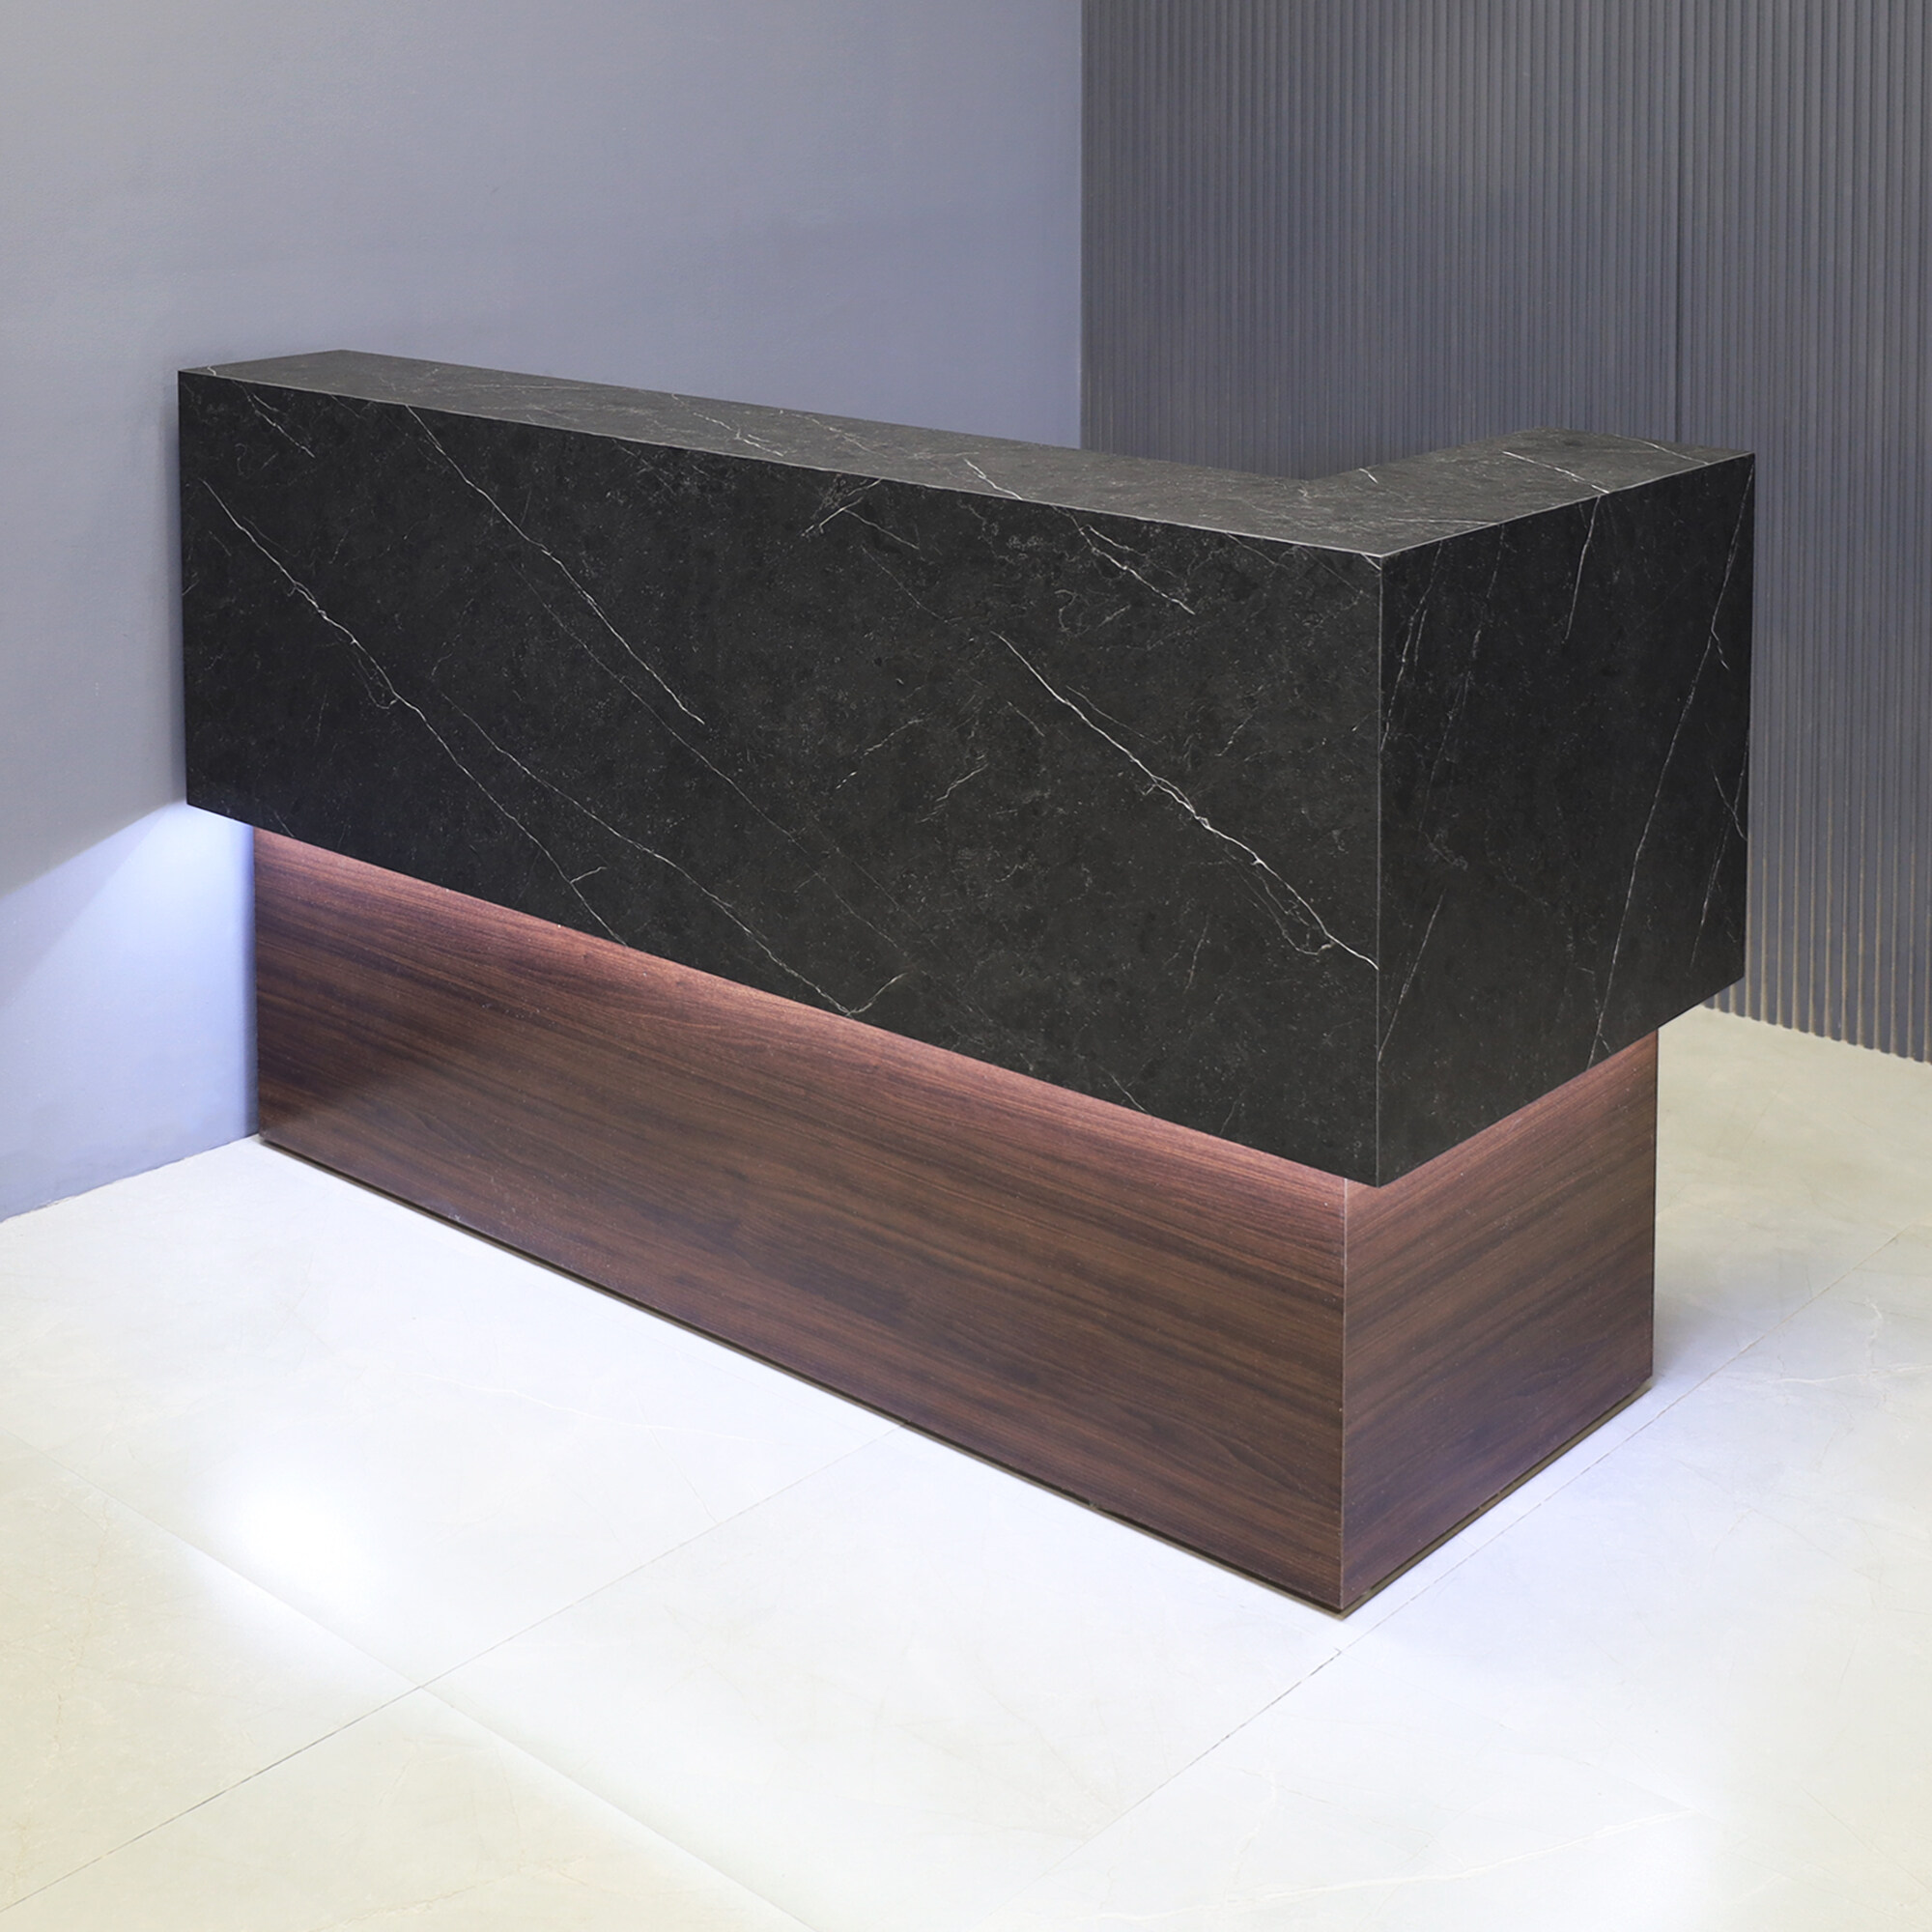 72-inch San Francisco L-Shape Reception Desk, right l-panel side when facing front in black sone pvc counter and colombian walnut matte laminate desk, with white LED, shown here.